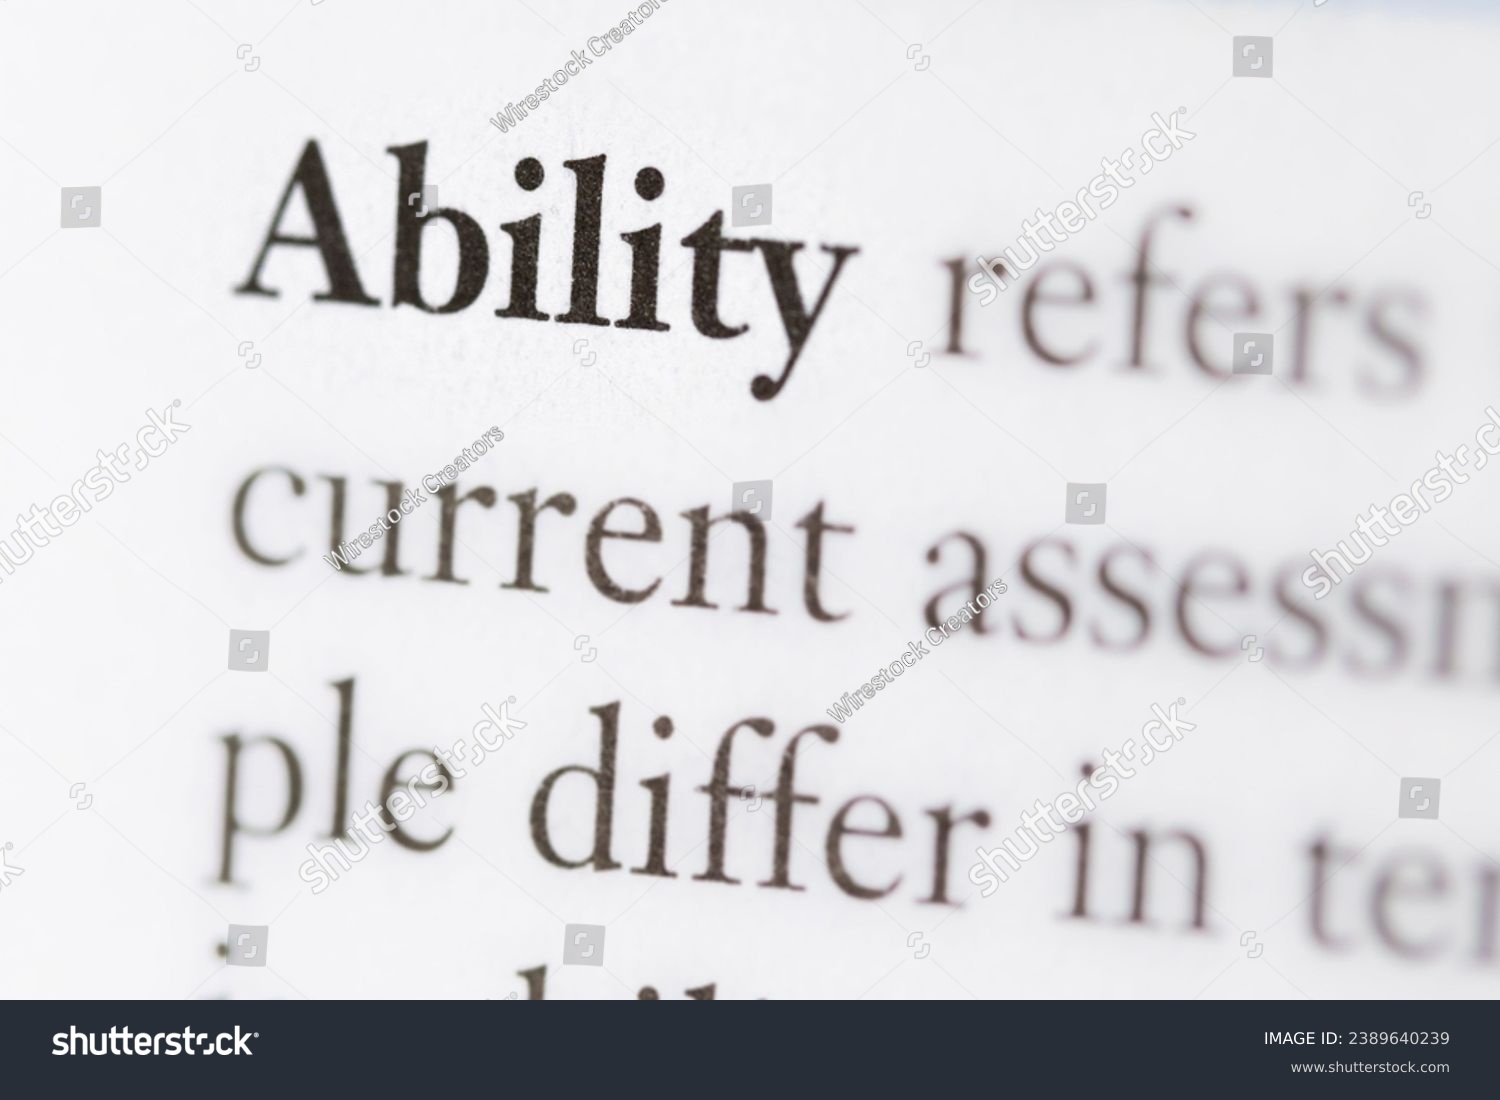 A close-up of a business textbook with the term 'Ability' highlighted and focused #2389640239